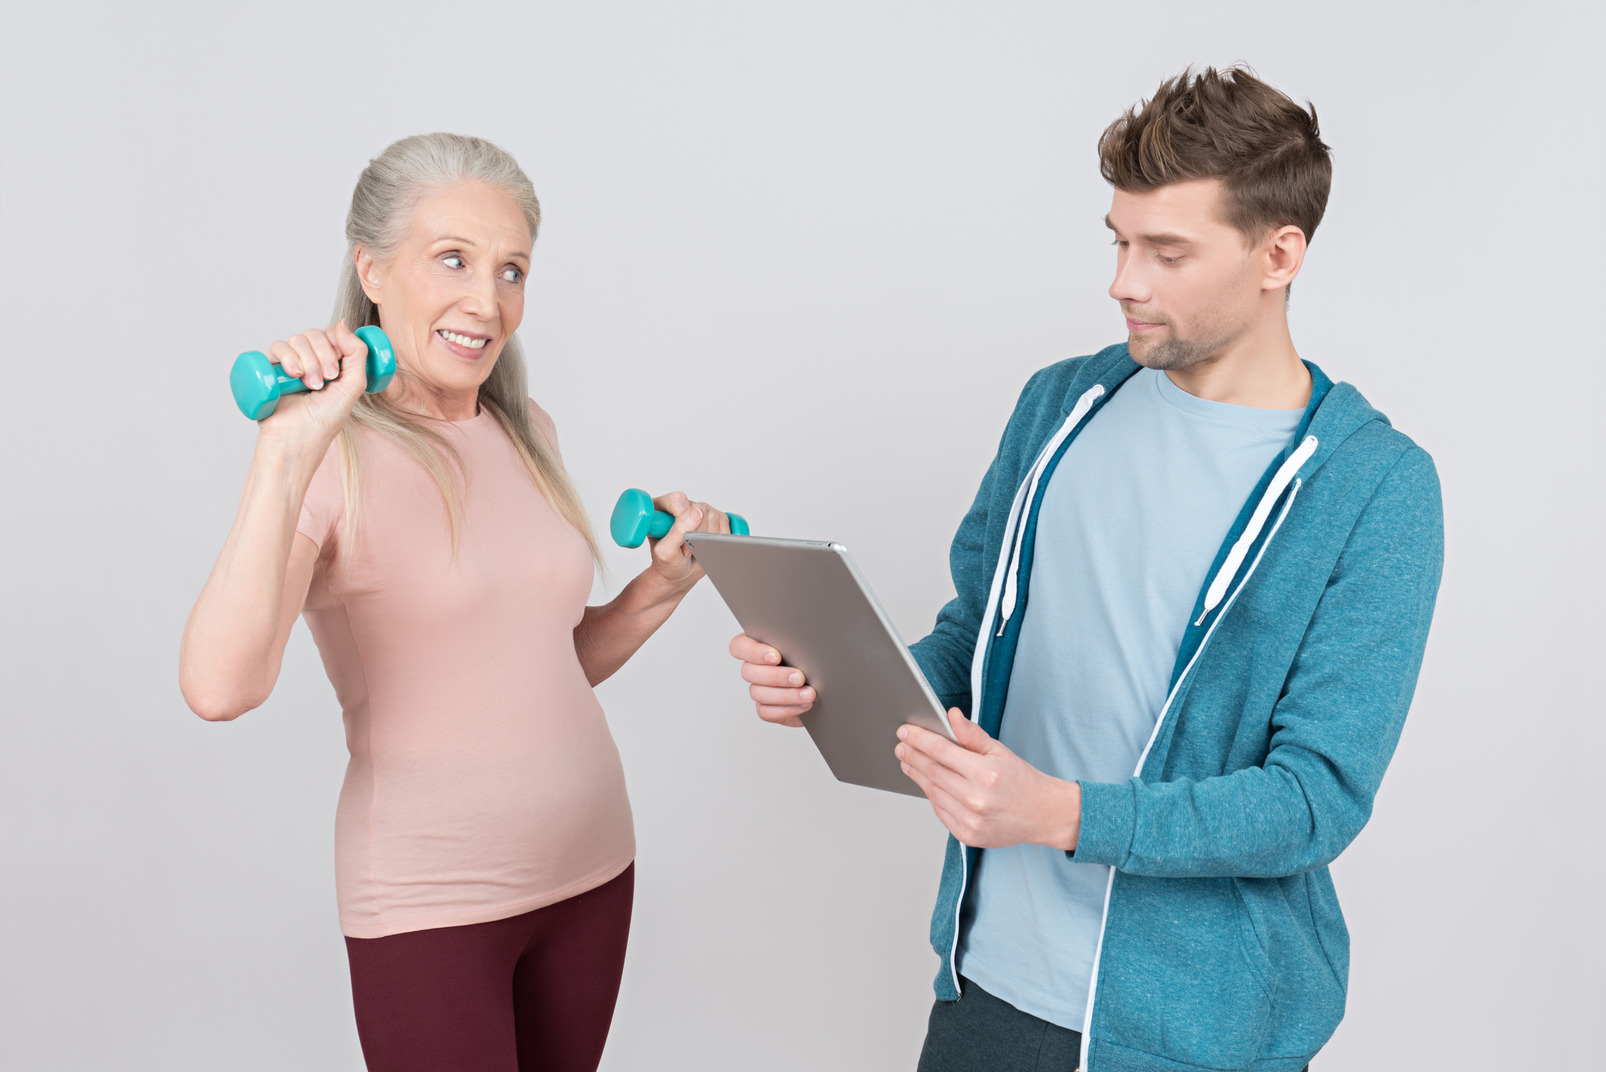 Young guy looking on tablet while old woman lifting hand weights